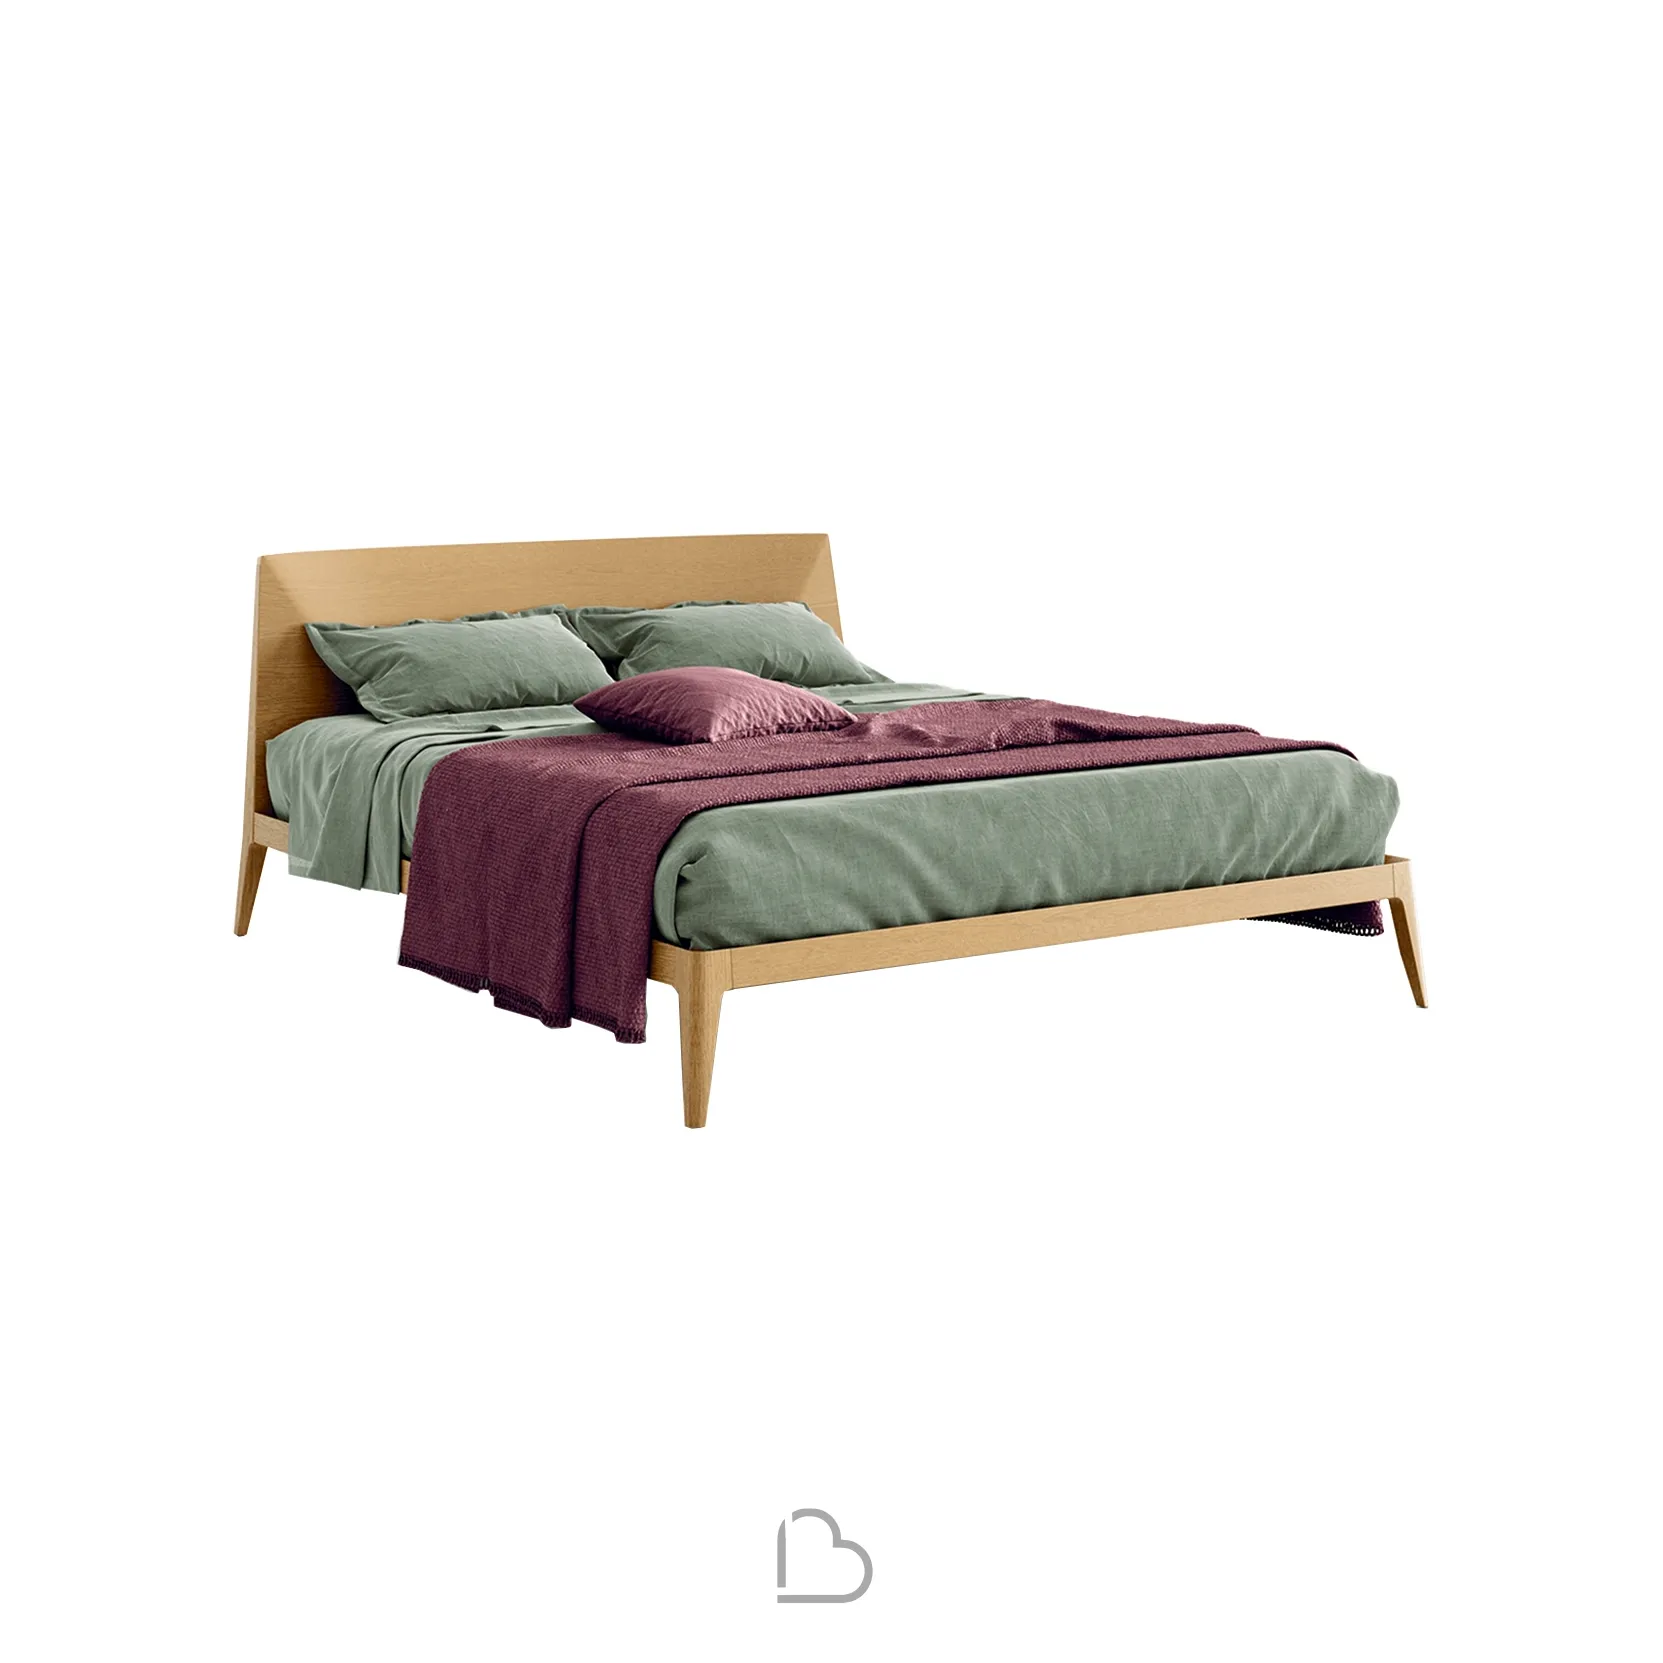 Bed Novamobili Siri Barthome, What Size Headboard For A Twin Xl Bed In Cm